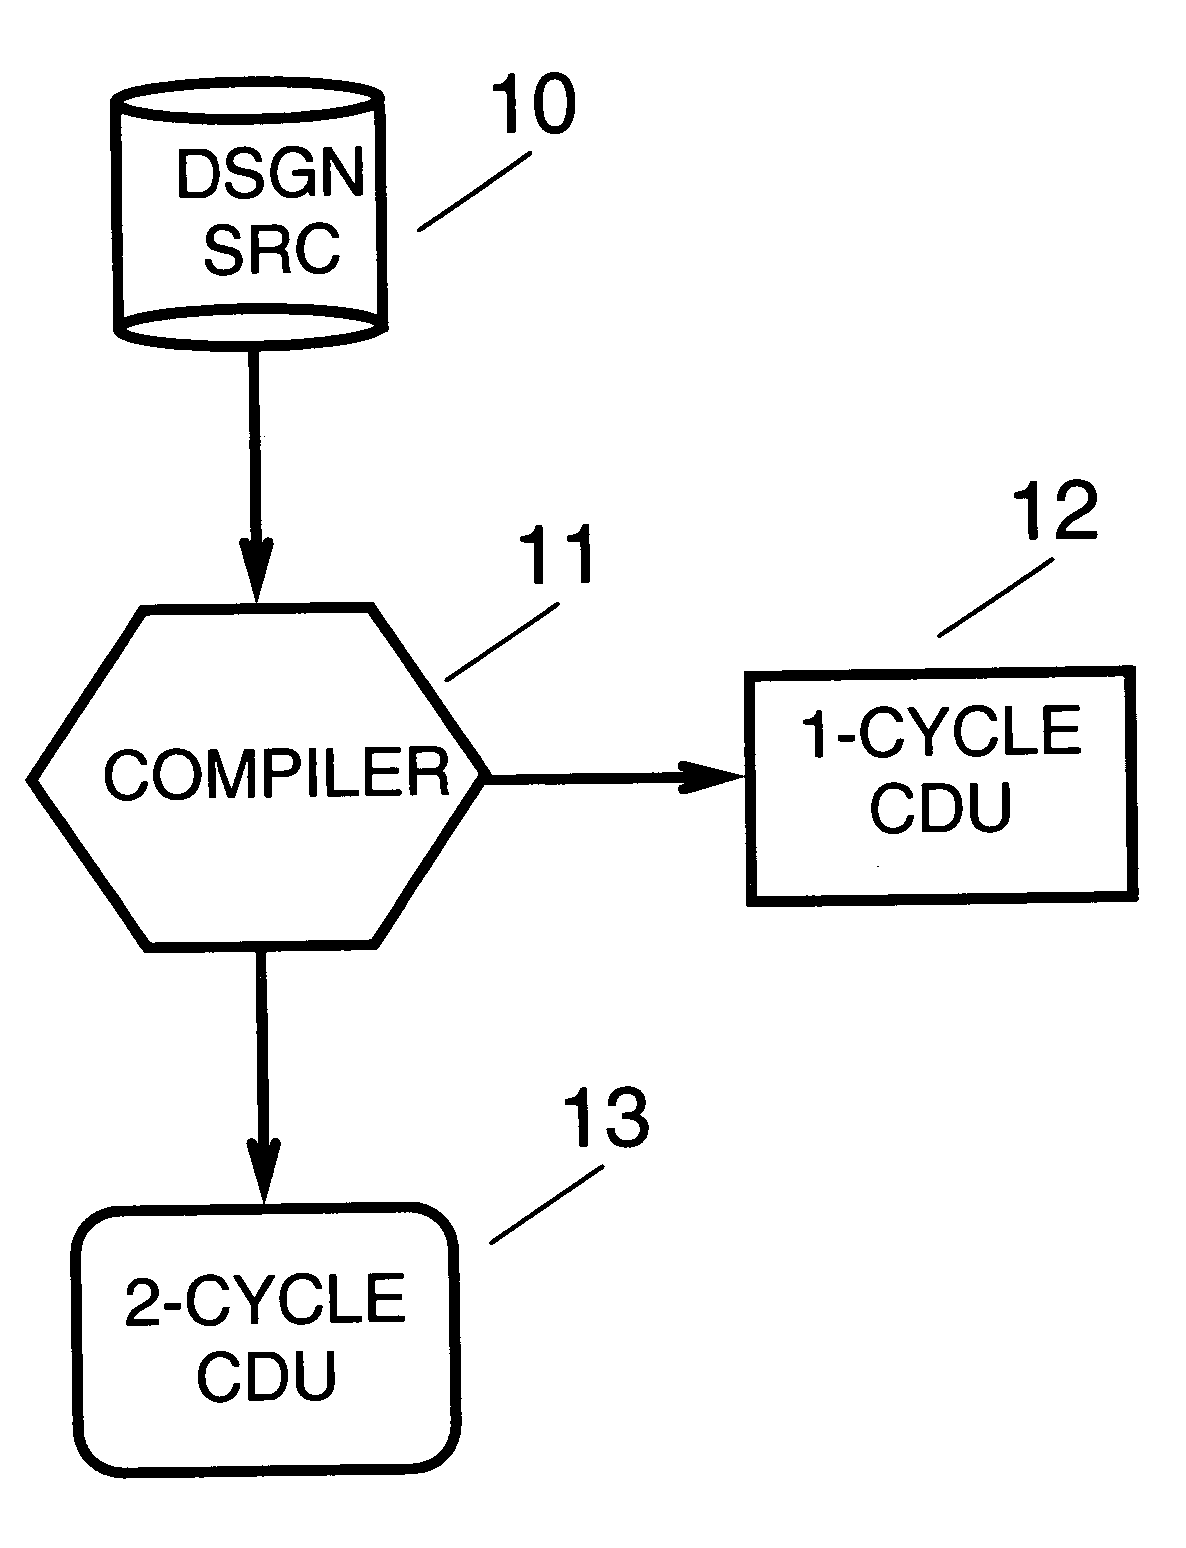 Method for the creation of a hybrid cycle simulation model